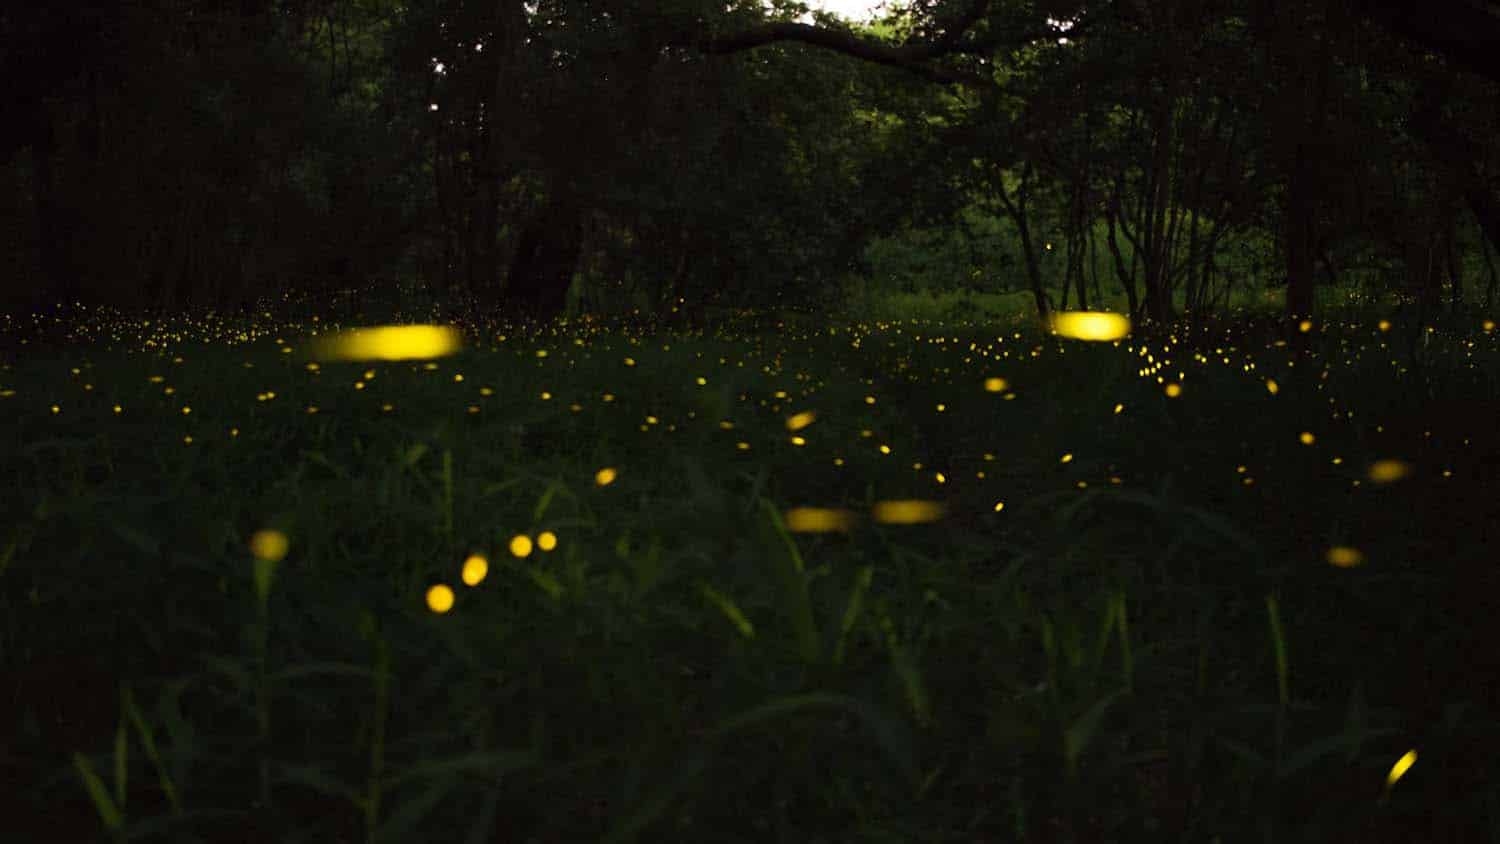 a time-lapse photograph shows fireflies as blurs of light in a meadow surrounded by trees at dusk.